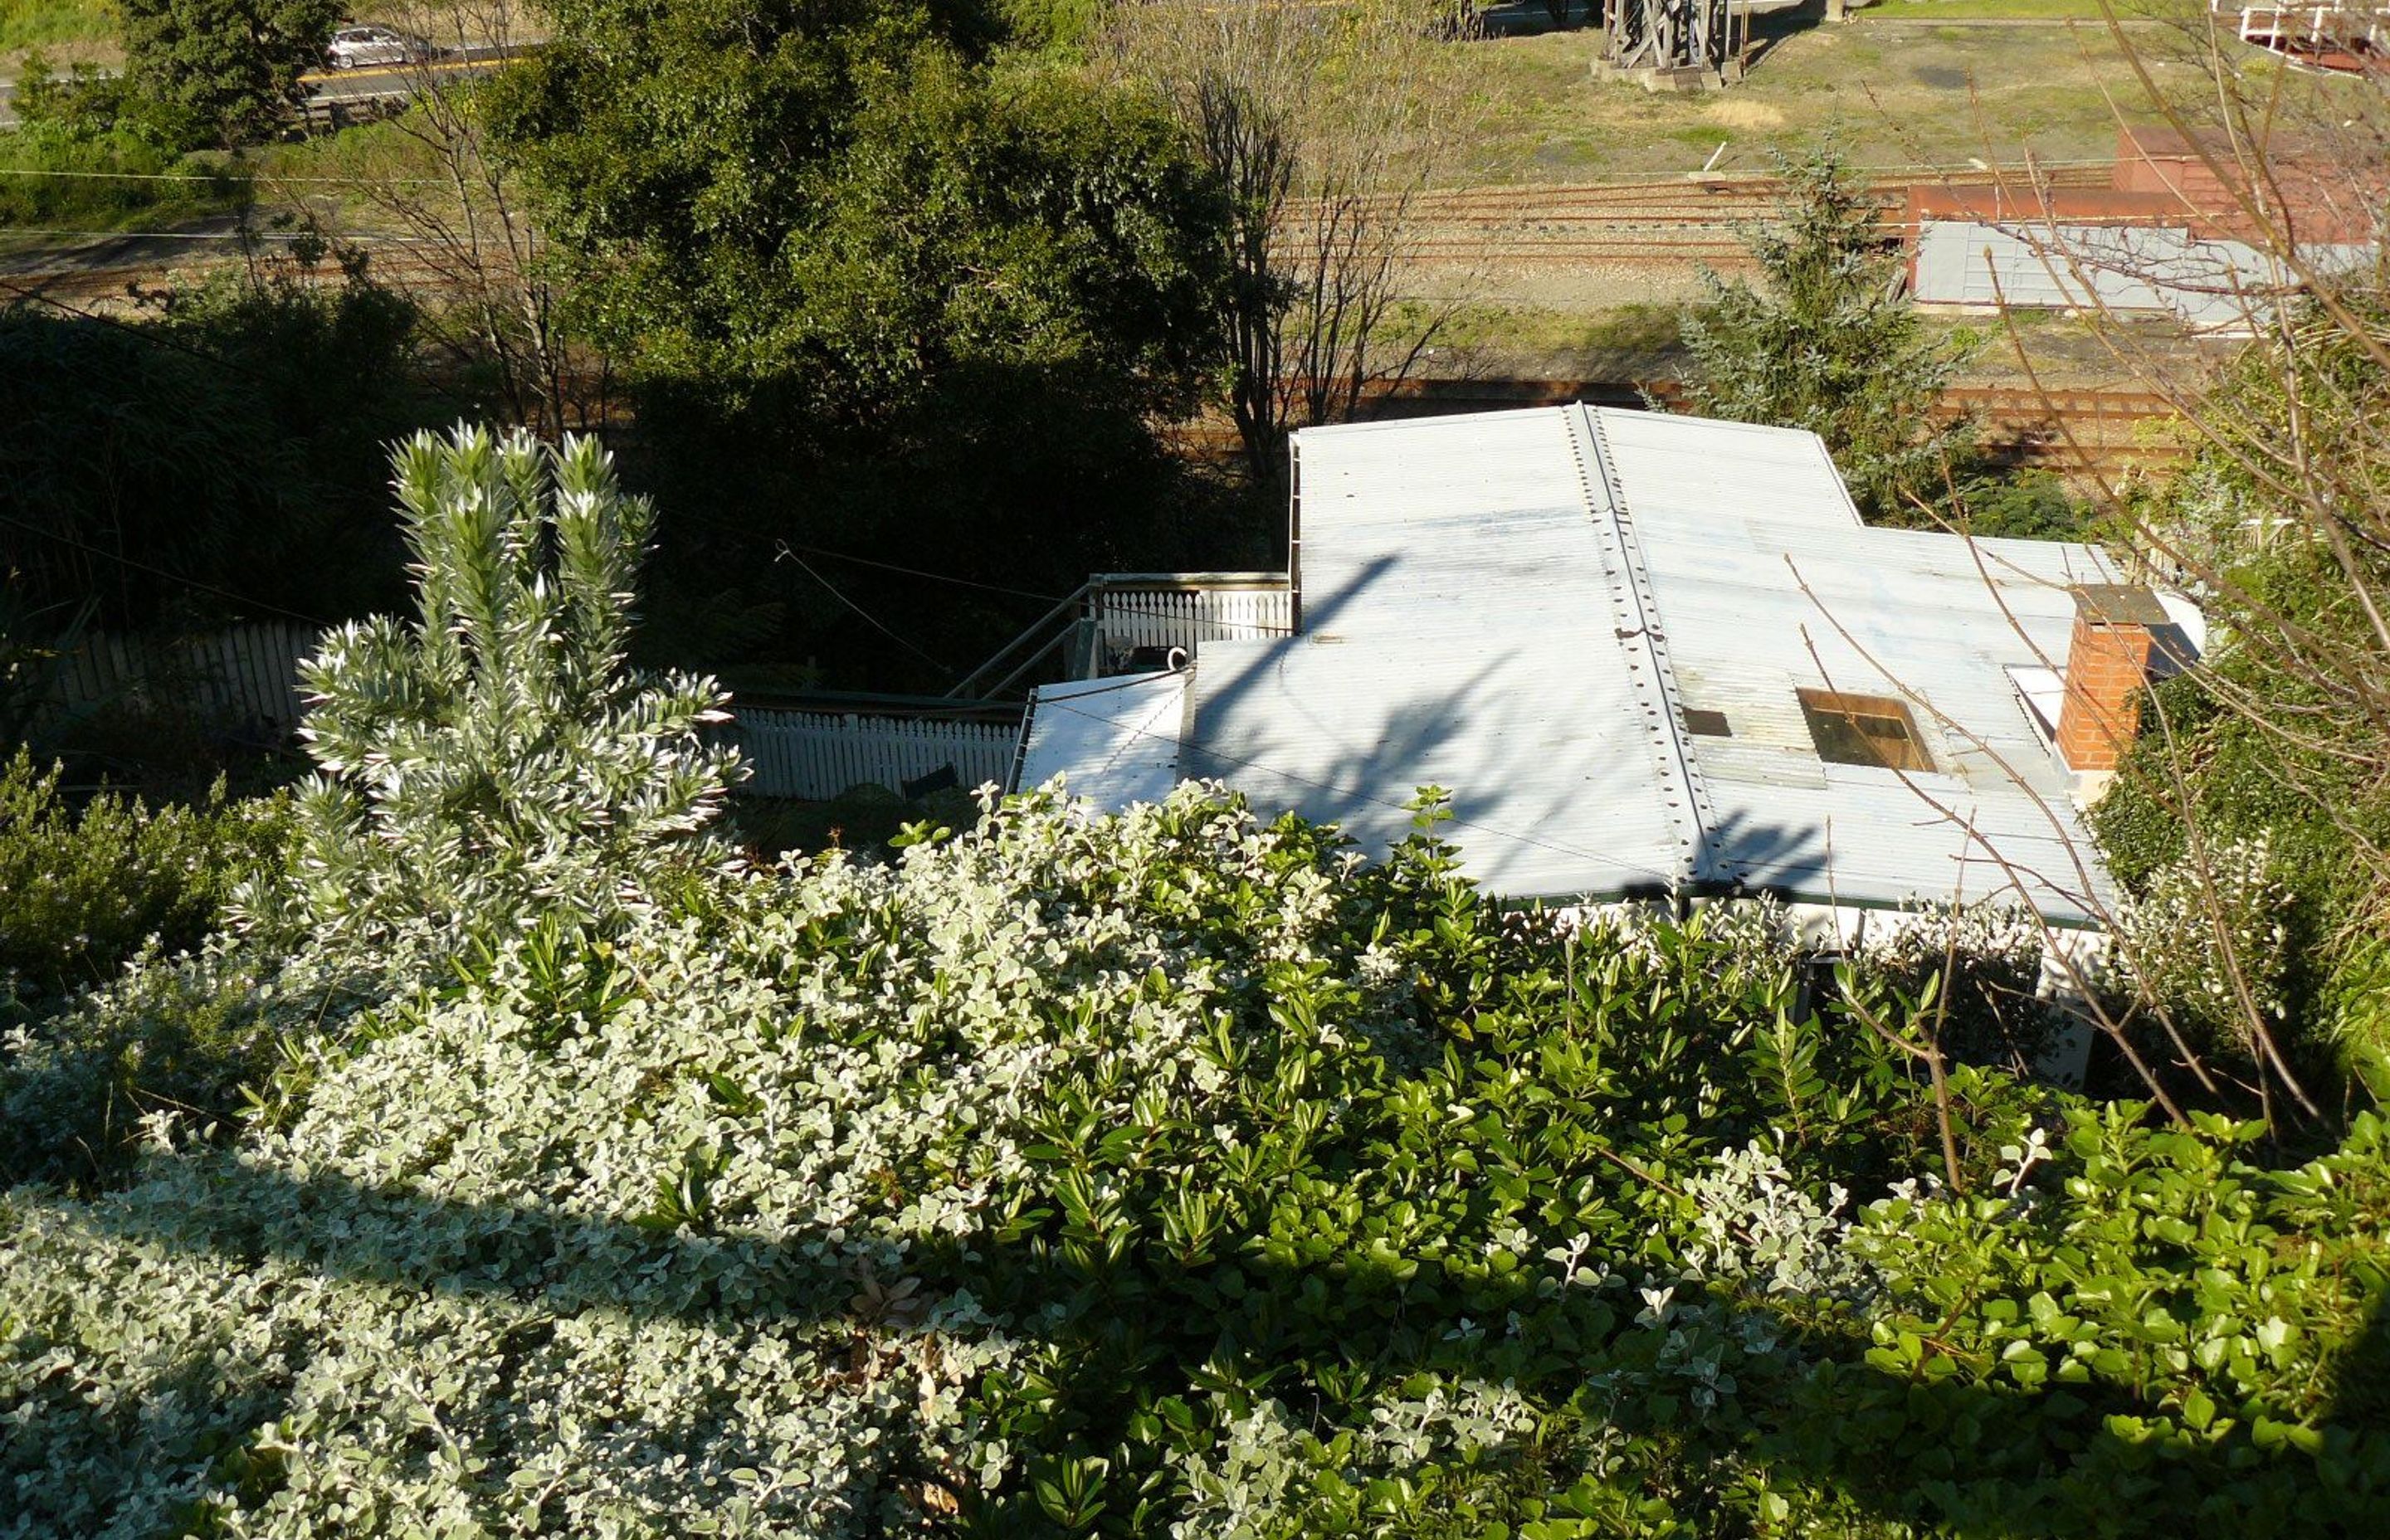 While this particular section receives plenty of natural sun, most is targetted at the home's roof. 